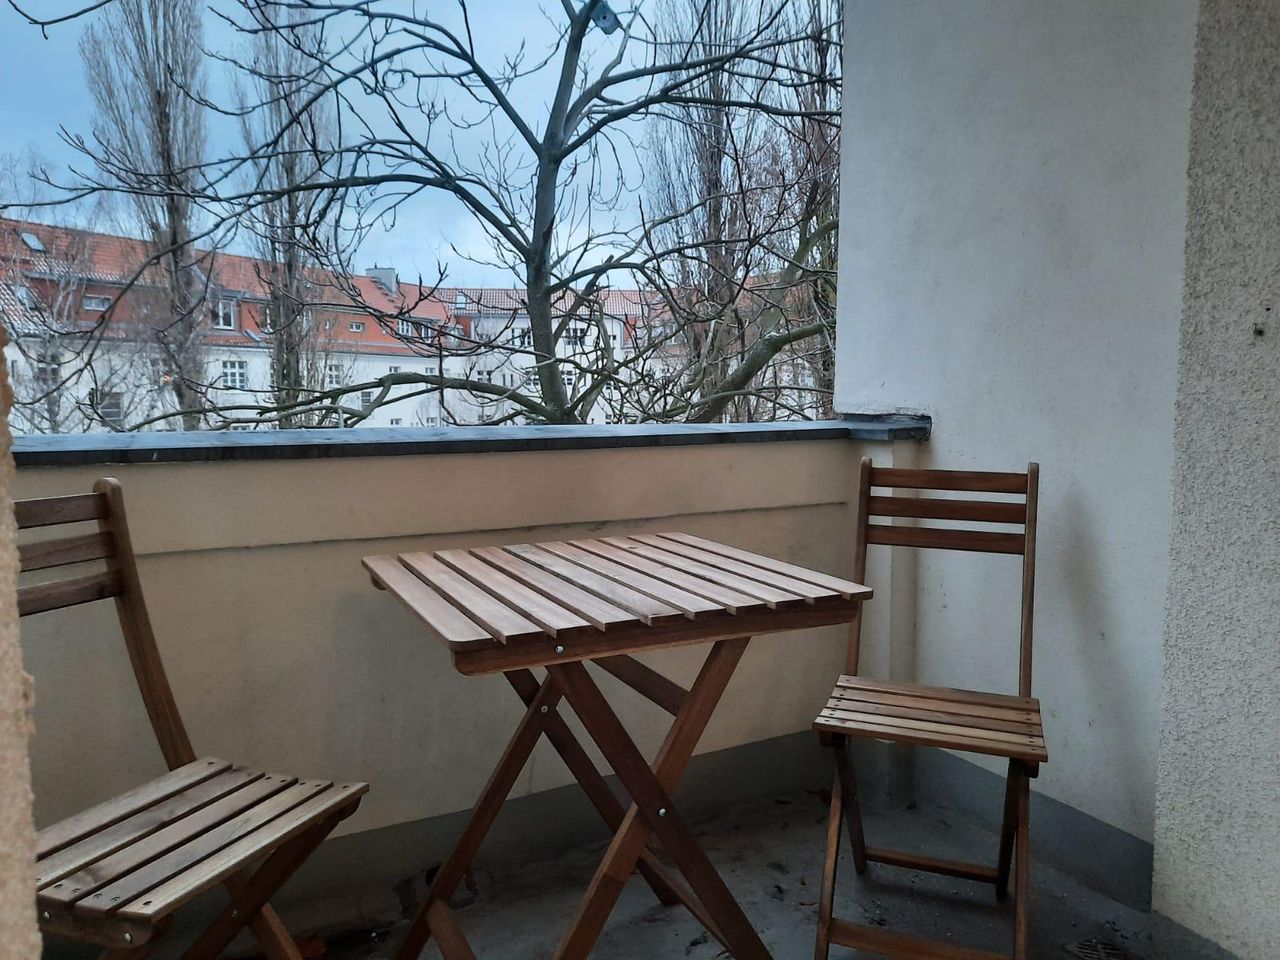 Completely new furnished, bright 2-Z. Old building on the 2nd floor with balcony, central location Schöneweide near the Spree river